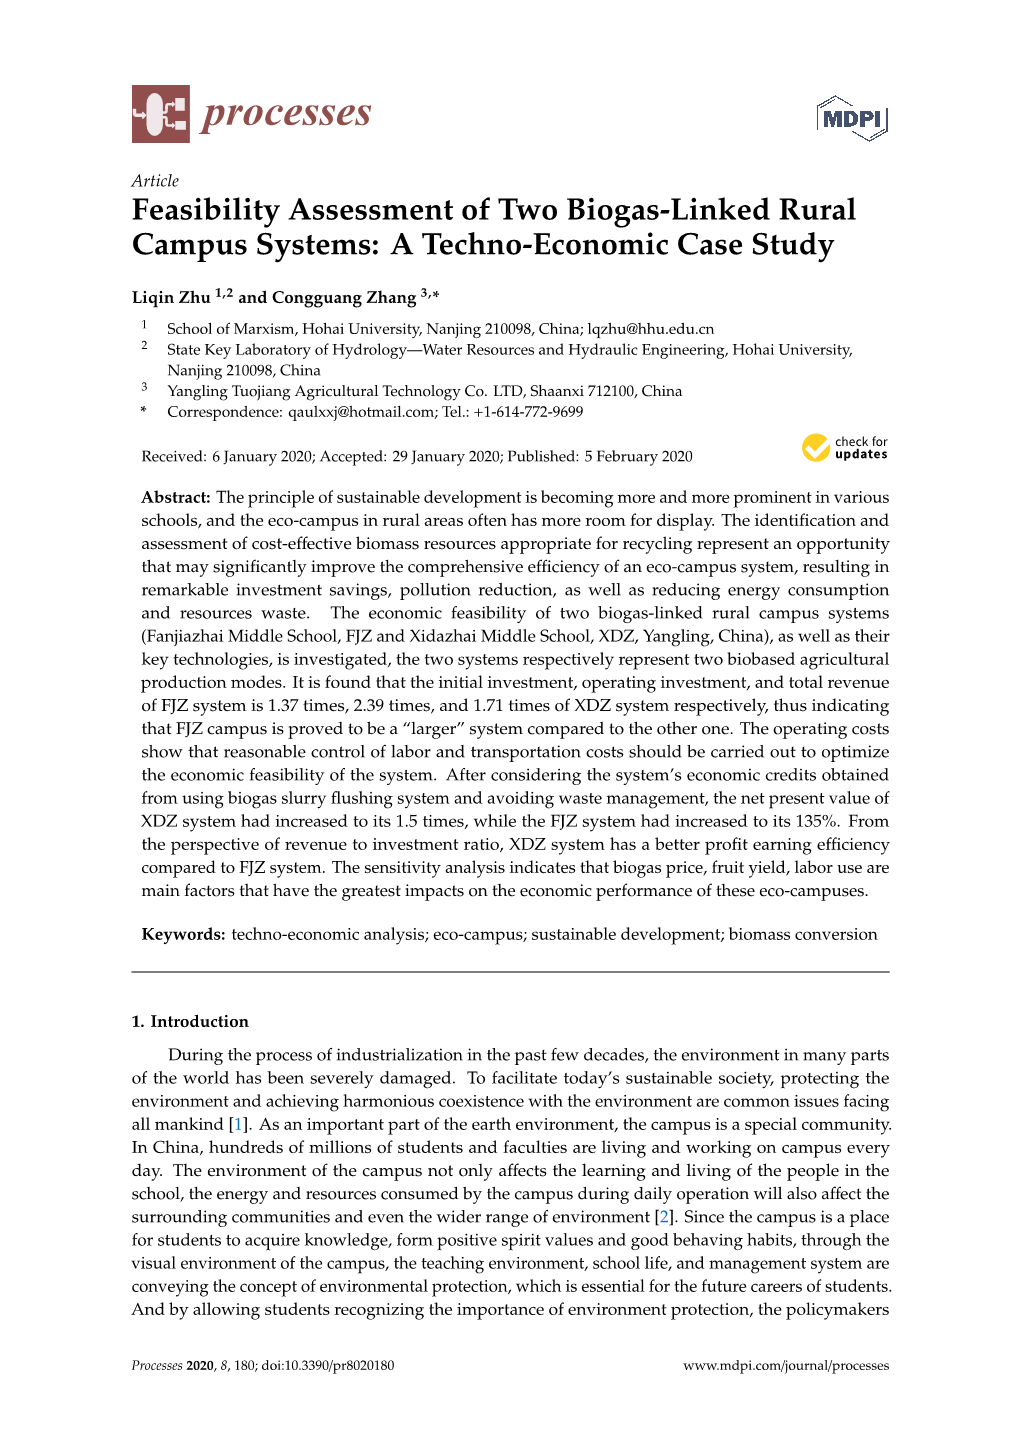 Feasibility Assessment of Two Biogas-Linked Rural Campus Systems: a Techno-Economic Case Study